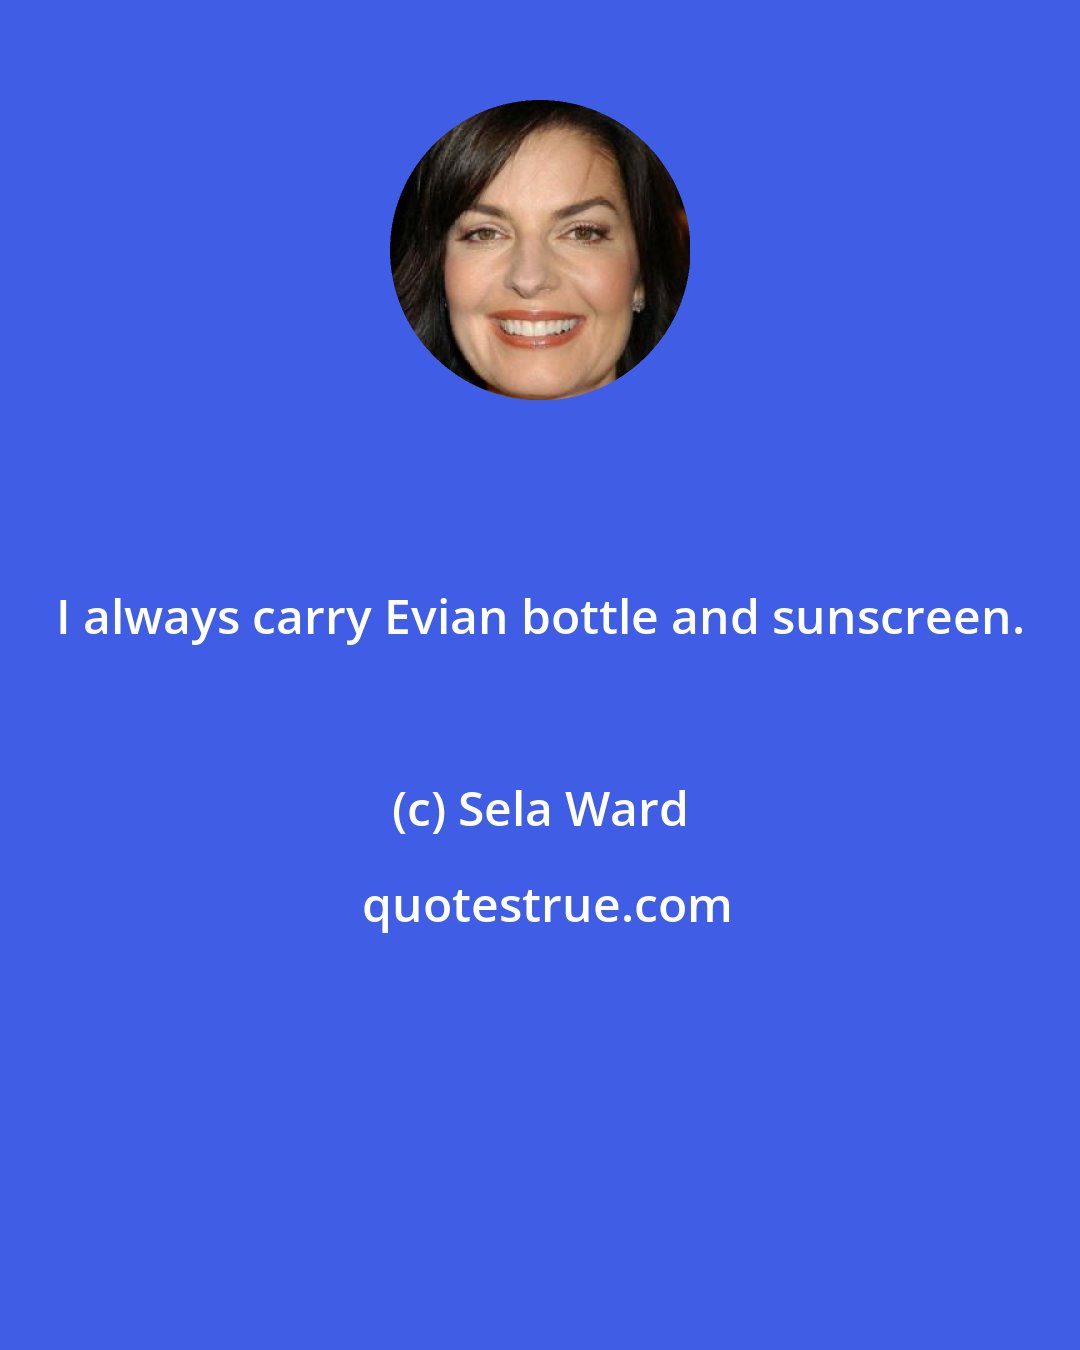 Sela Ward: I always carry Evian bottle and sunscreen.